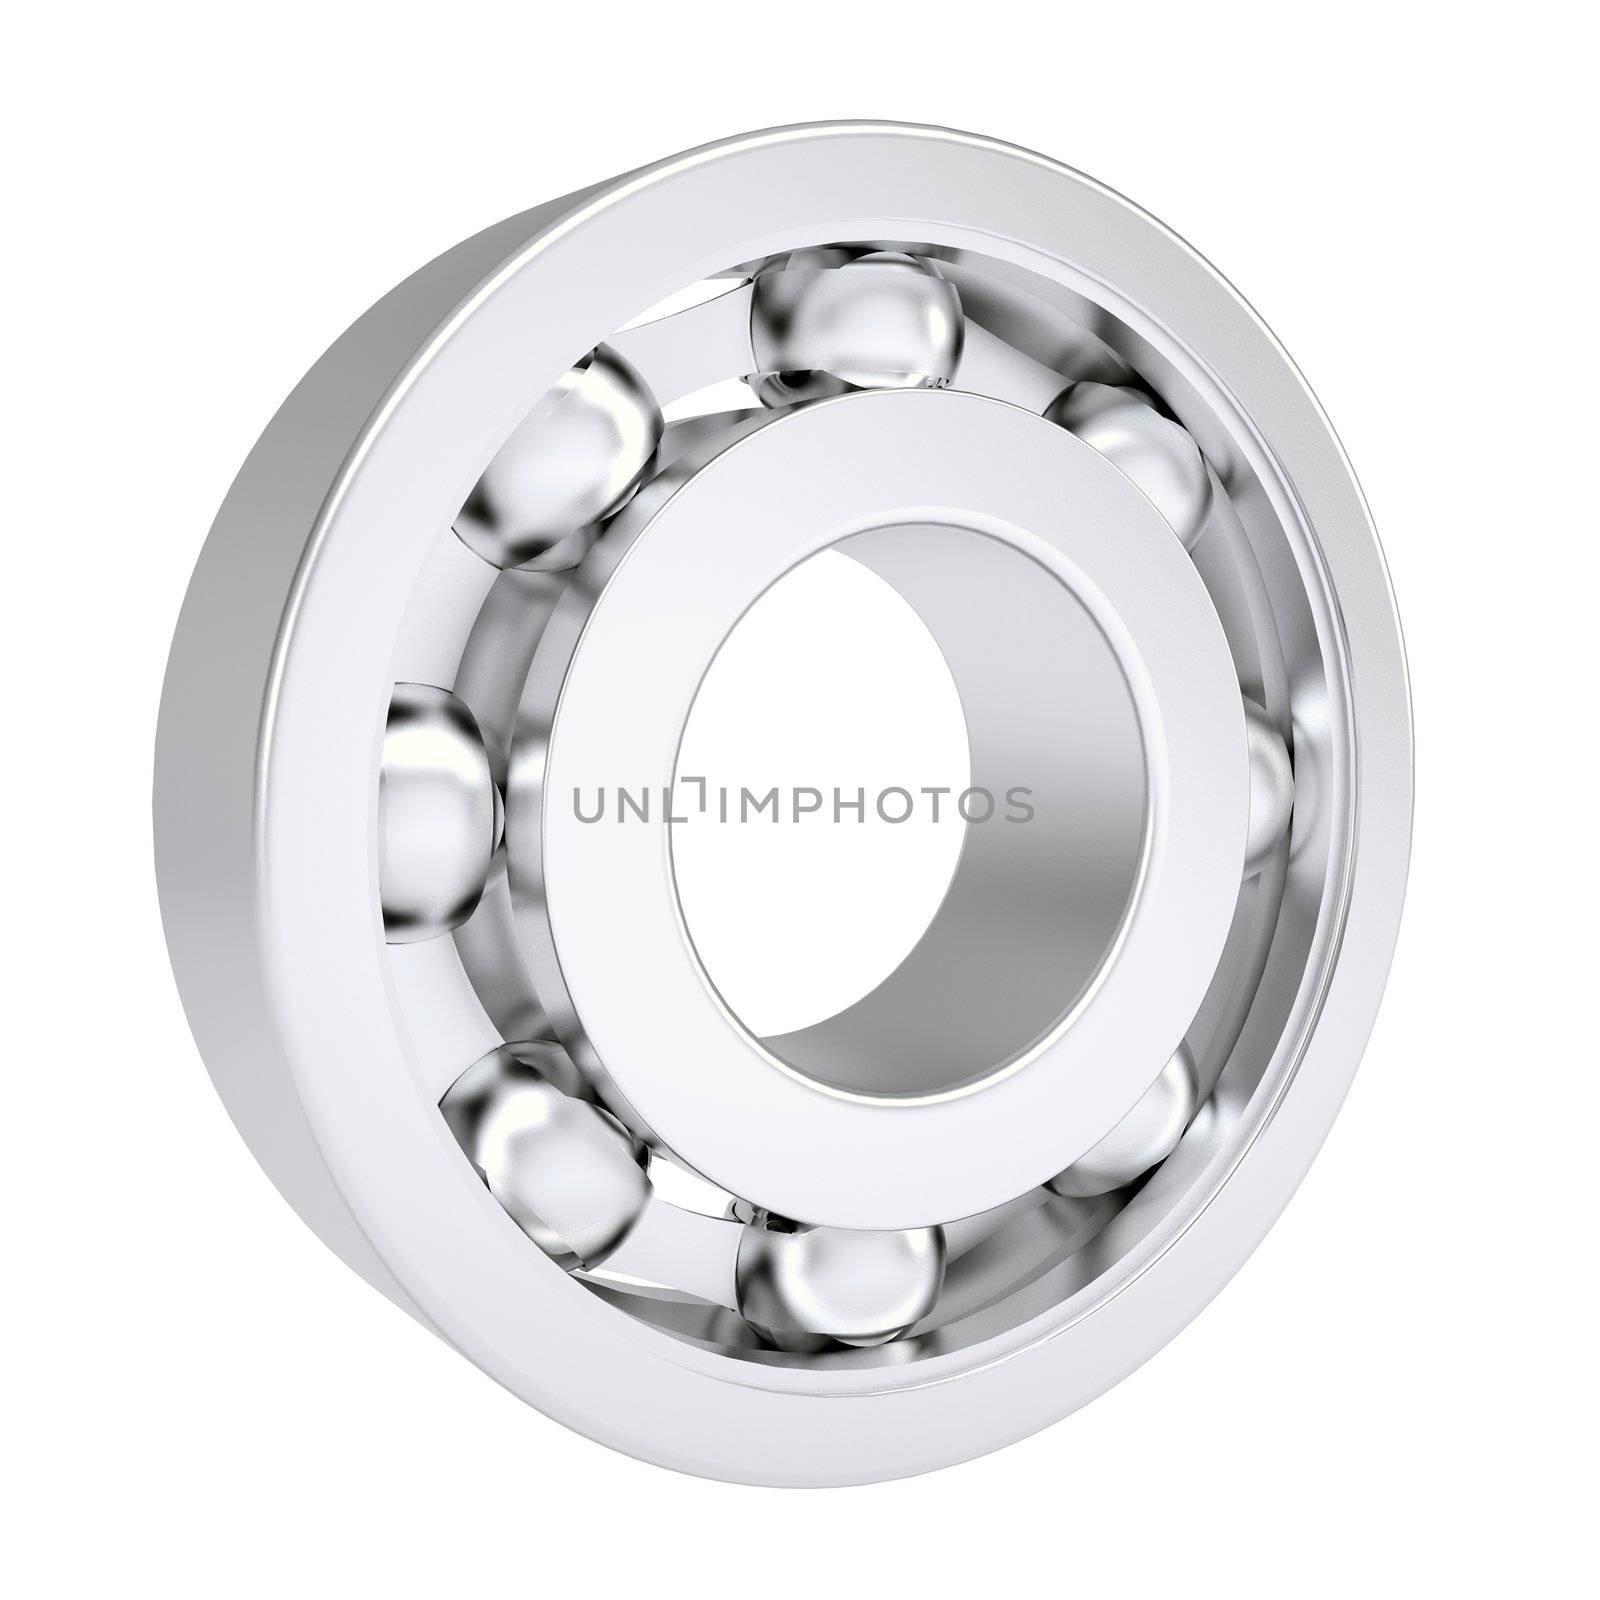 Ball bearing. Isolated render on a white background